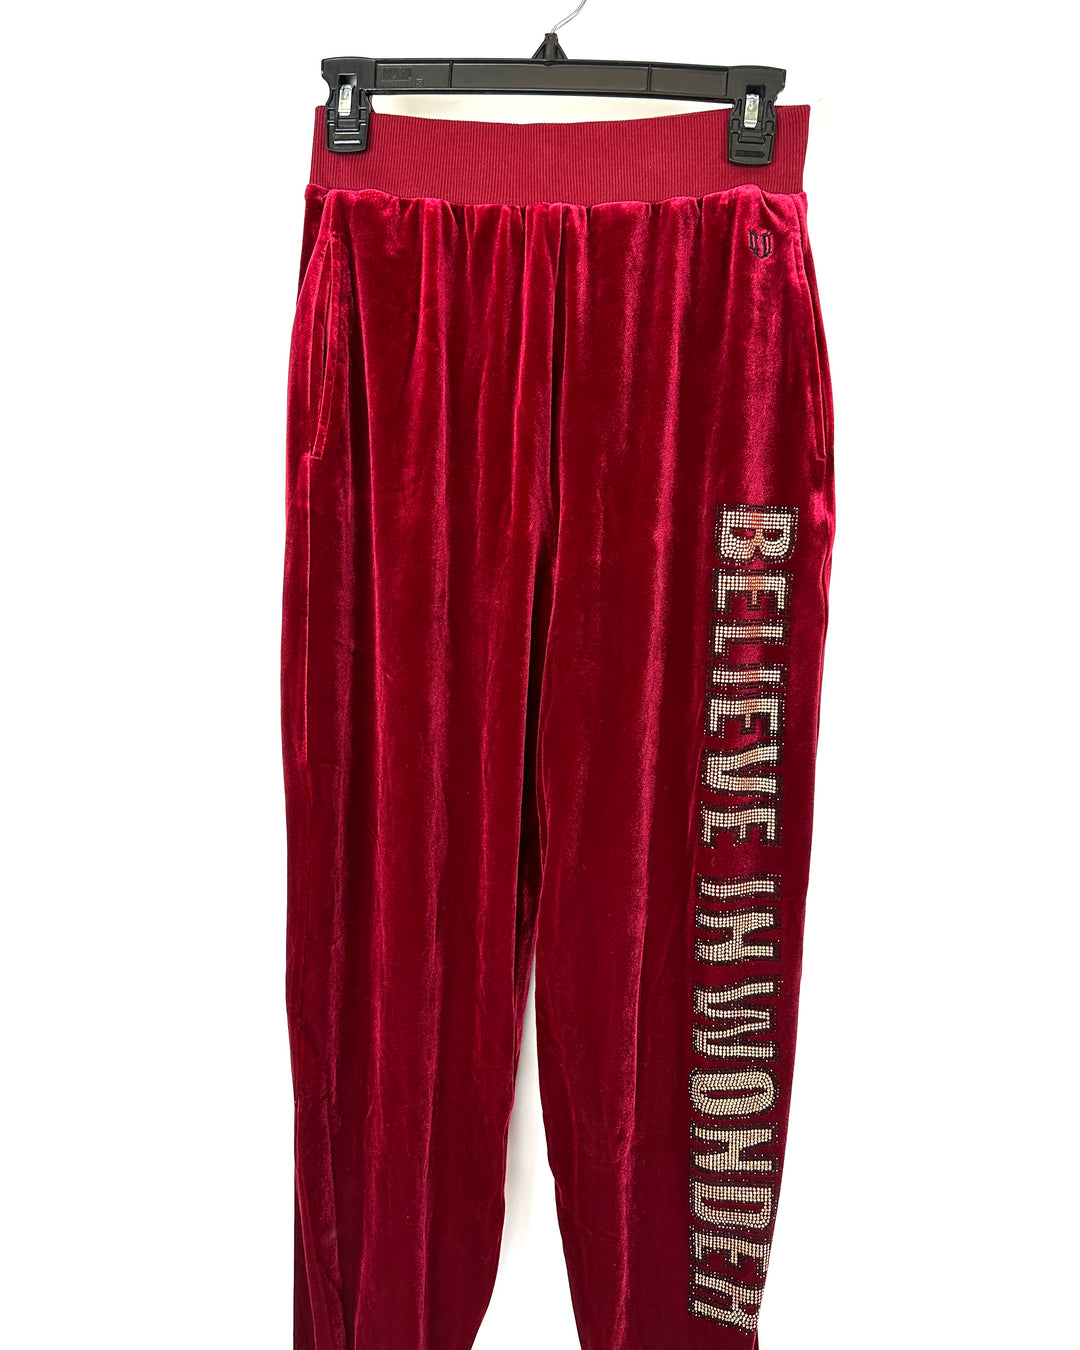 Red Joggers - Small, Medium, Large